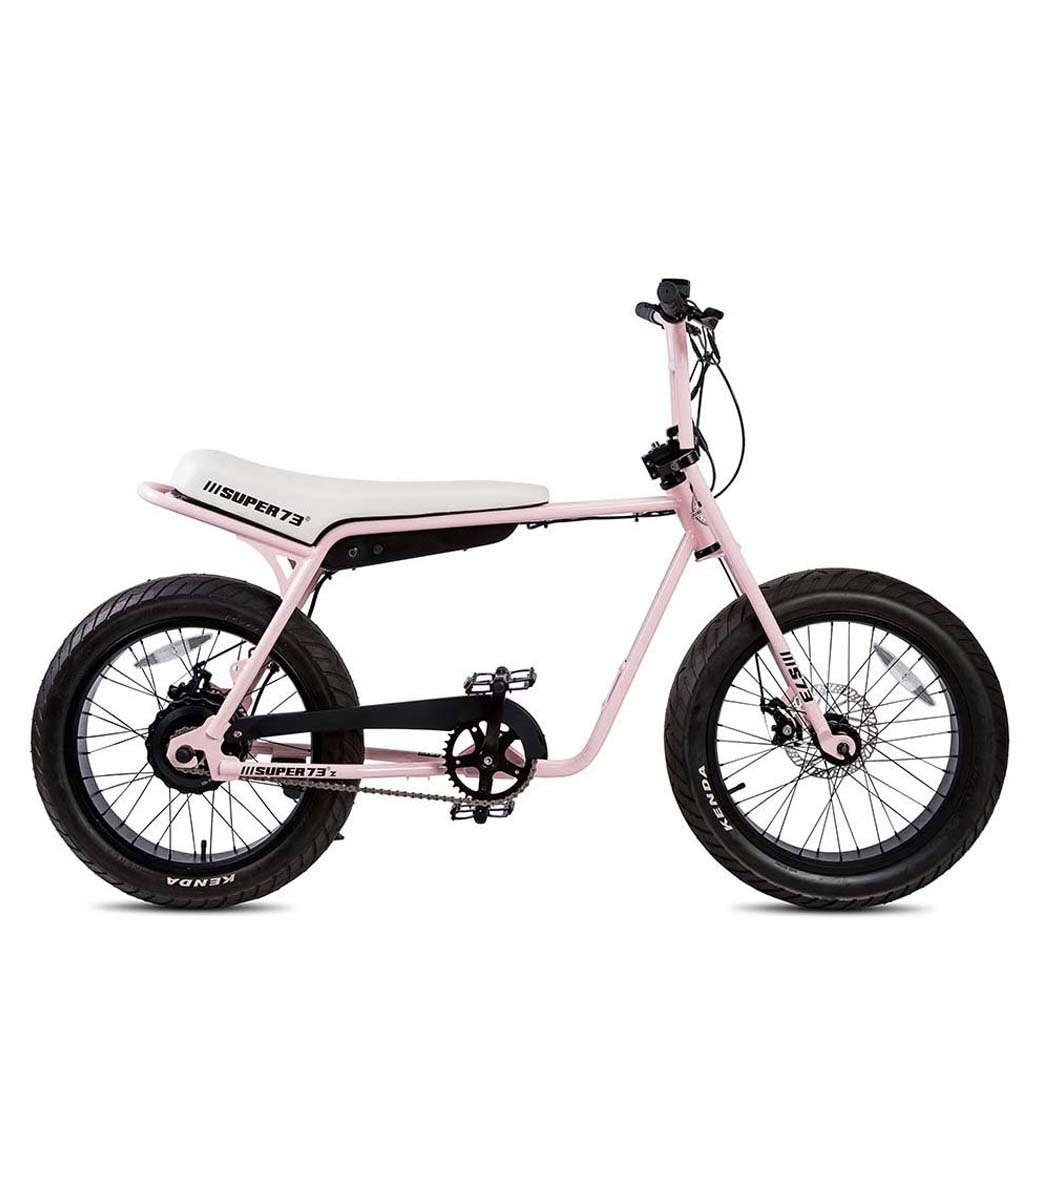 SUPER73-ZG Millenial Pink The SUPER73-ZG is perfect for exploring the city. The compact frame and the EPAC 250W internal hub motor make an excellent vehicle for anyone who wants the superior feeling of a regular SUPER73 with a smaller frame.